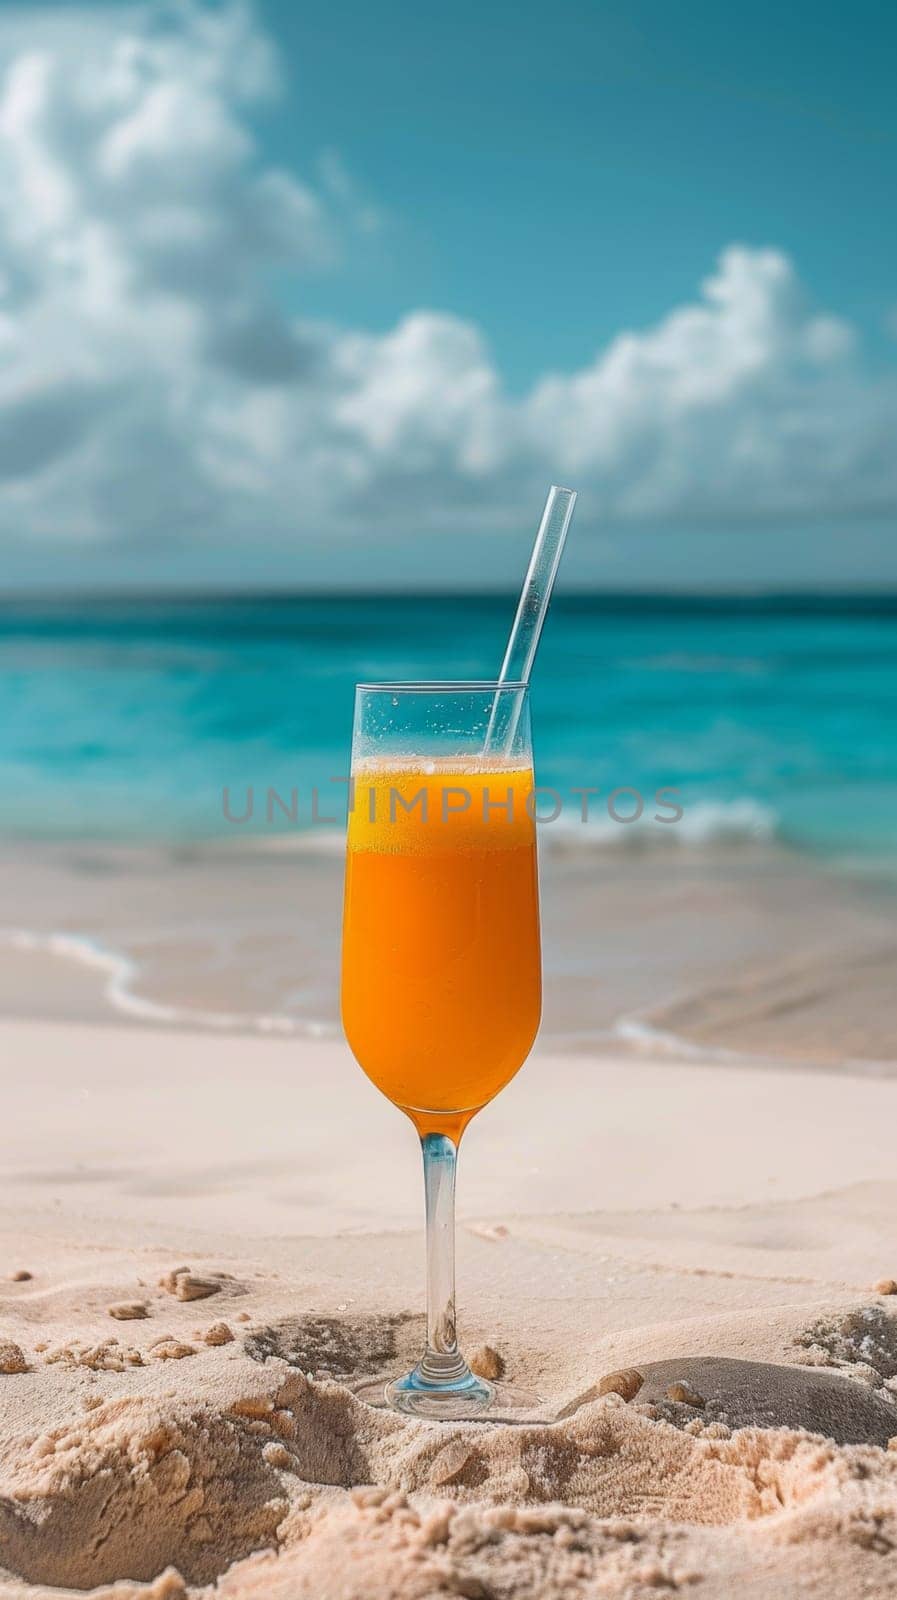 A glass of a drink sitting on the beach with sand, AI by starush